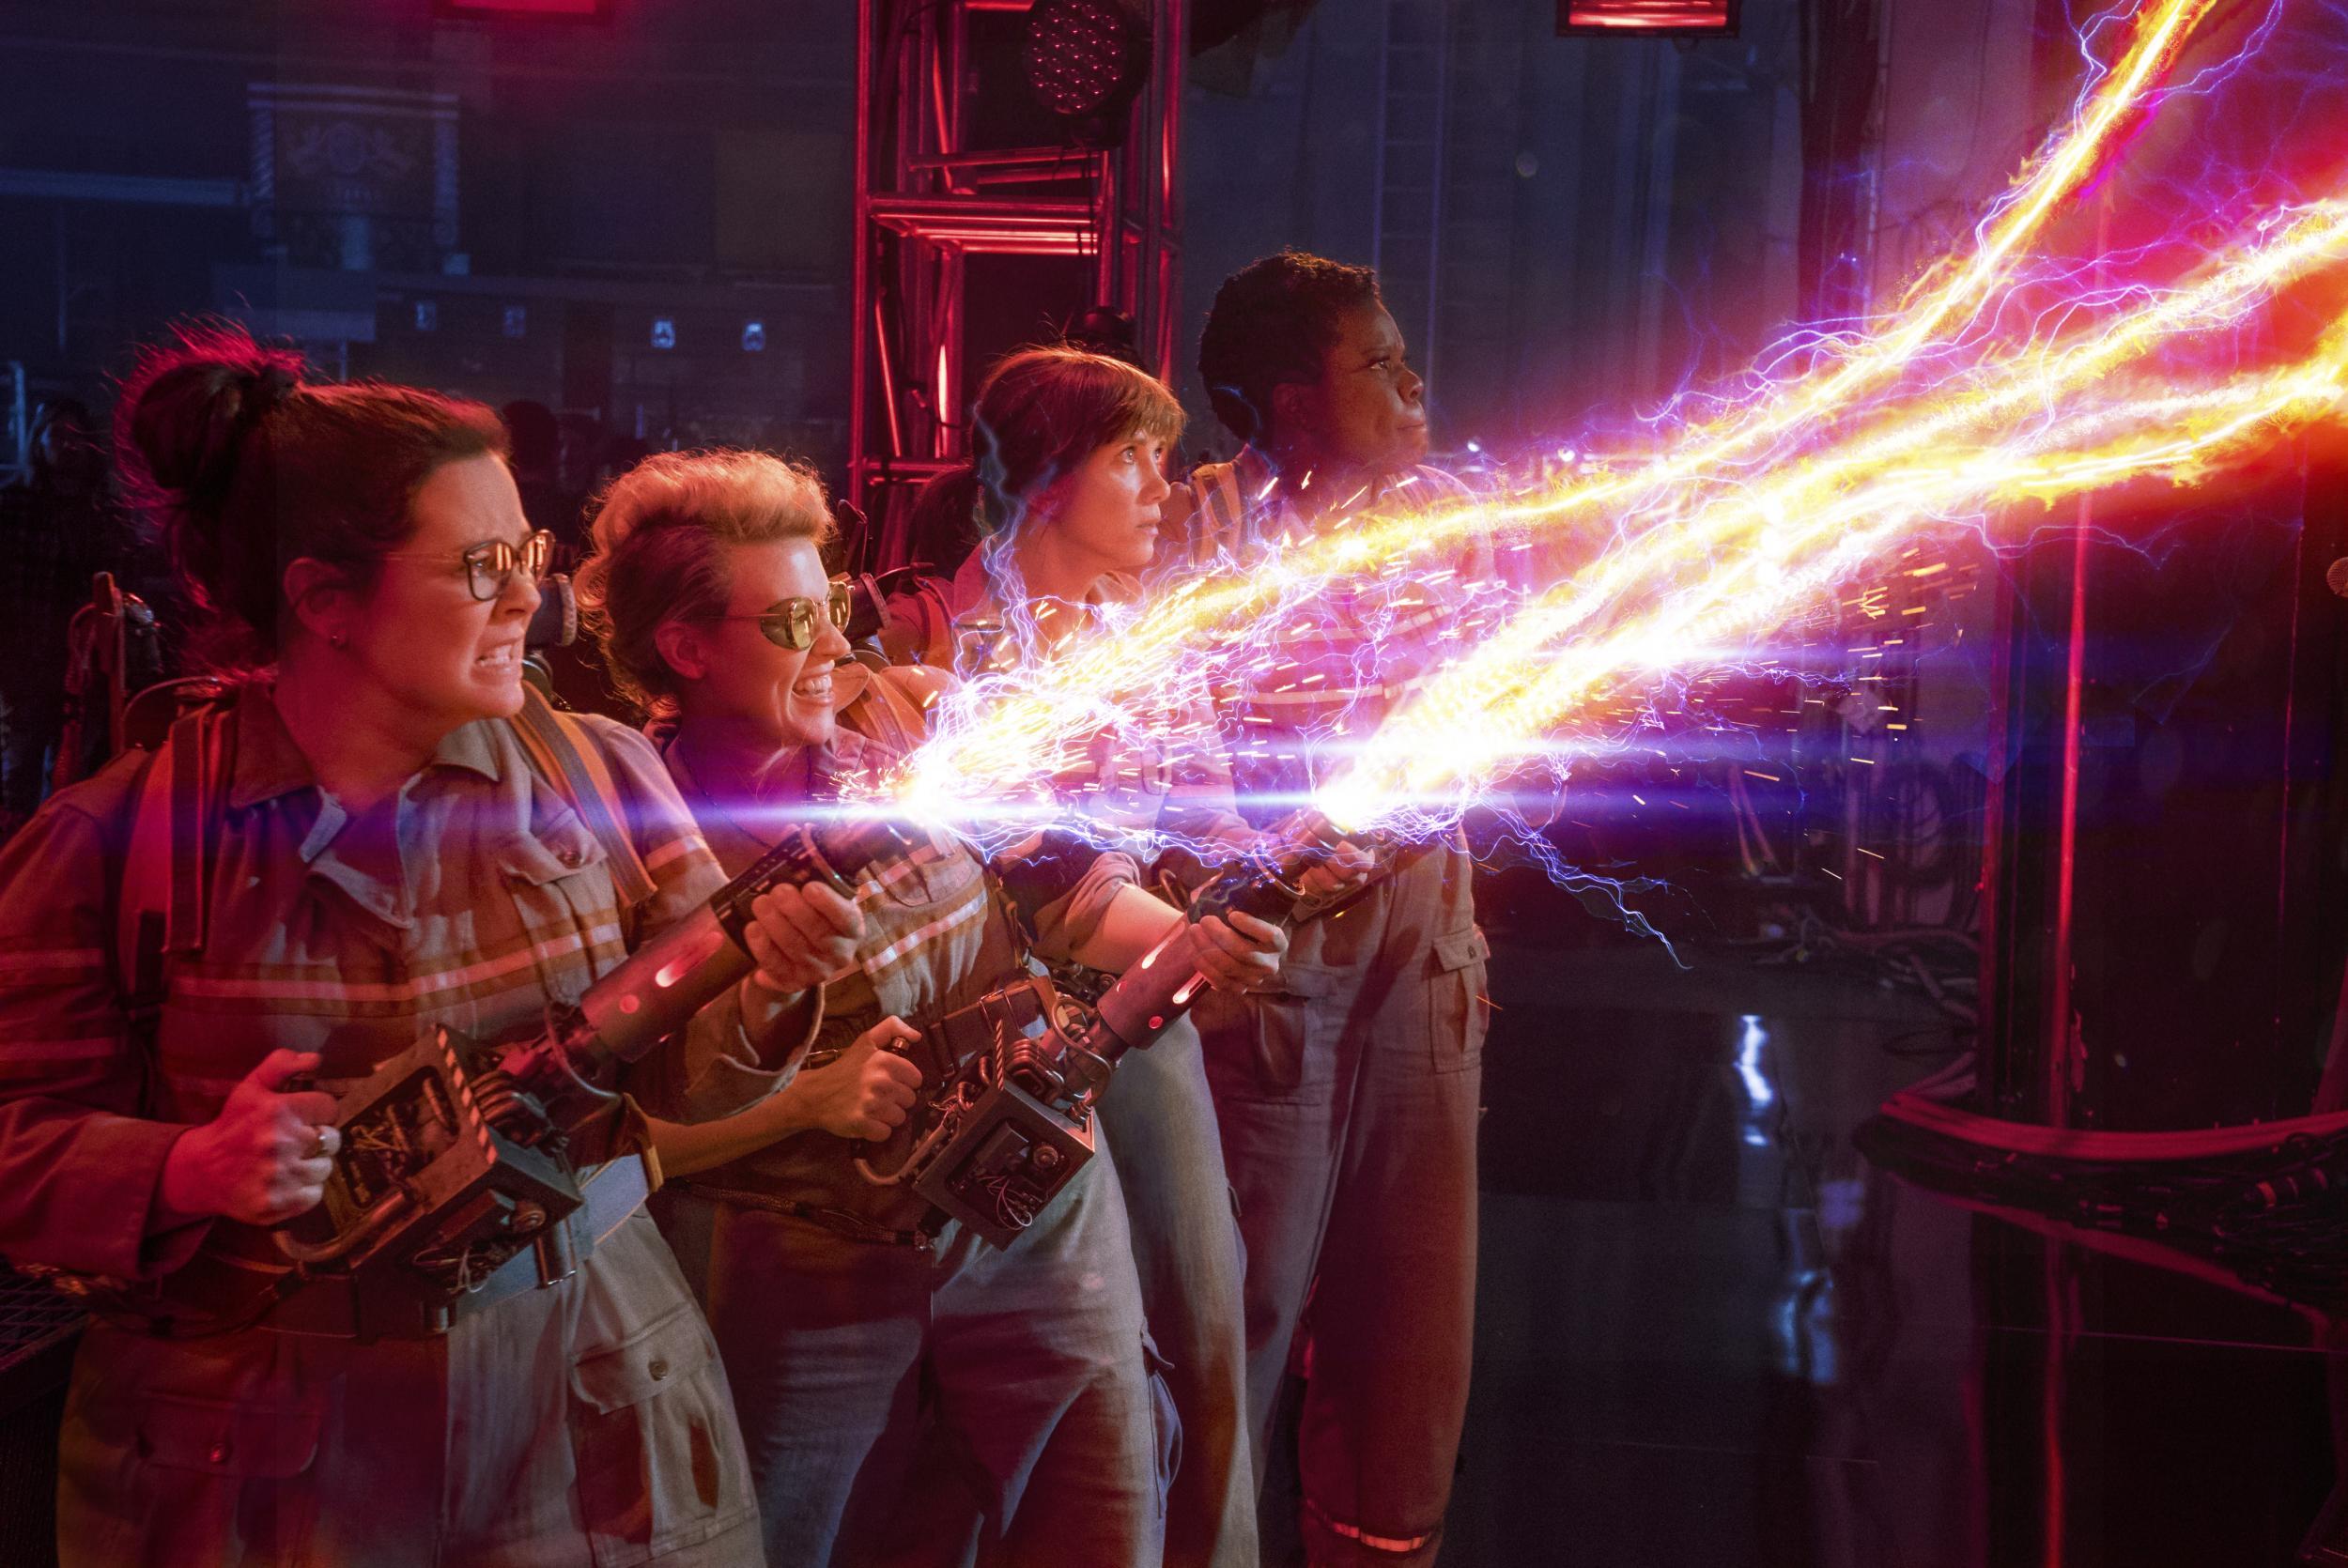 It sounds like the Ghostbusters will answering those calls for years to come